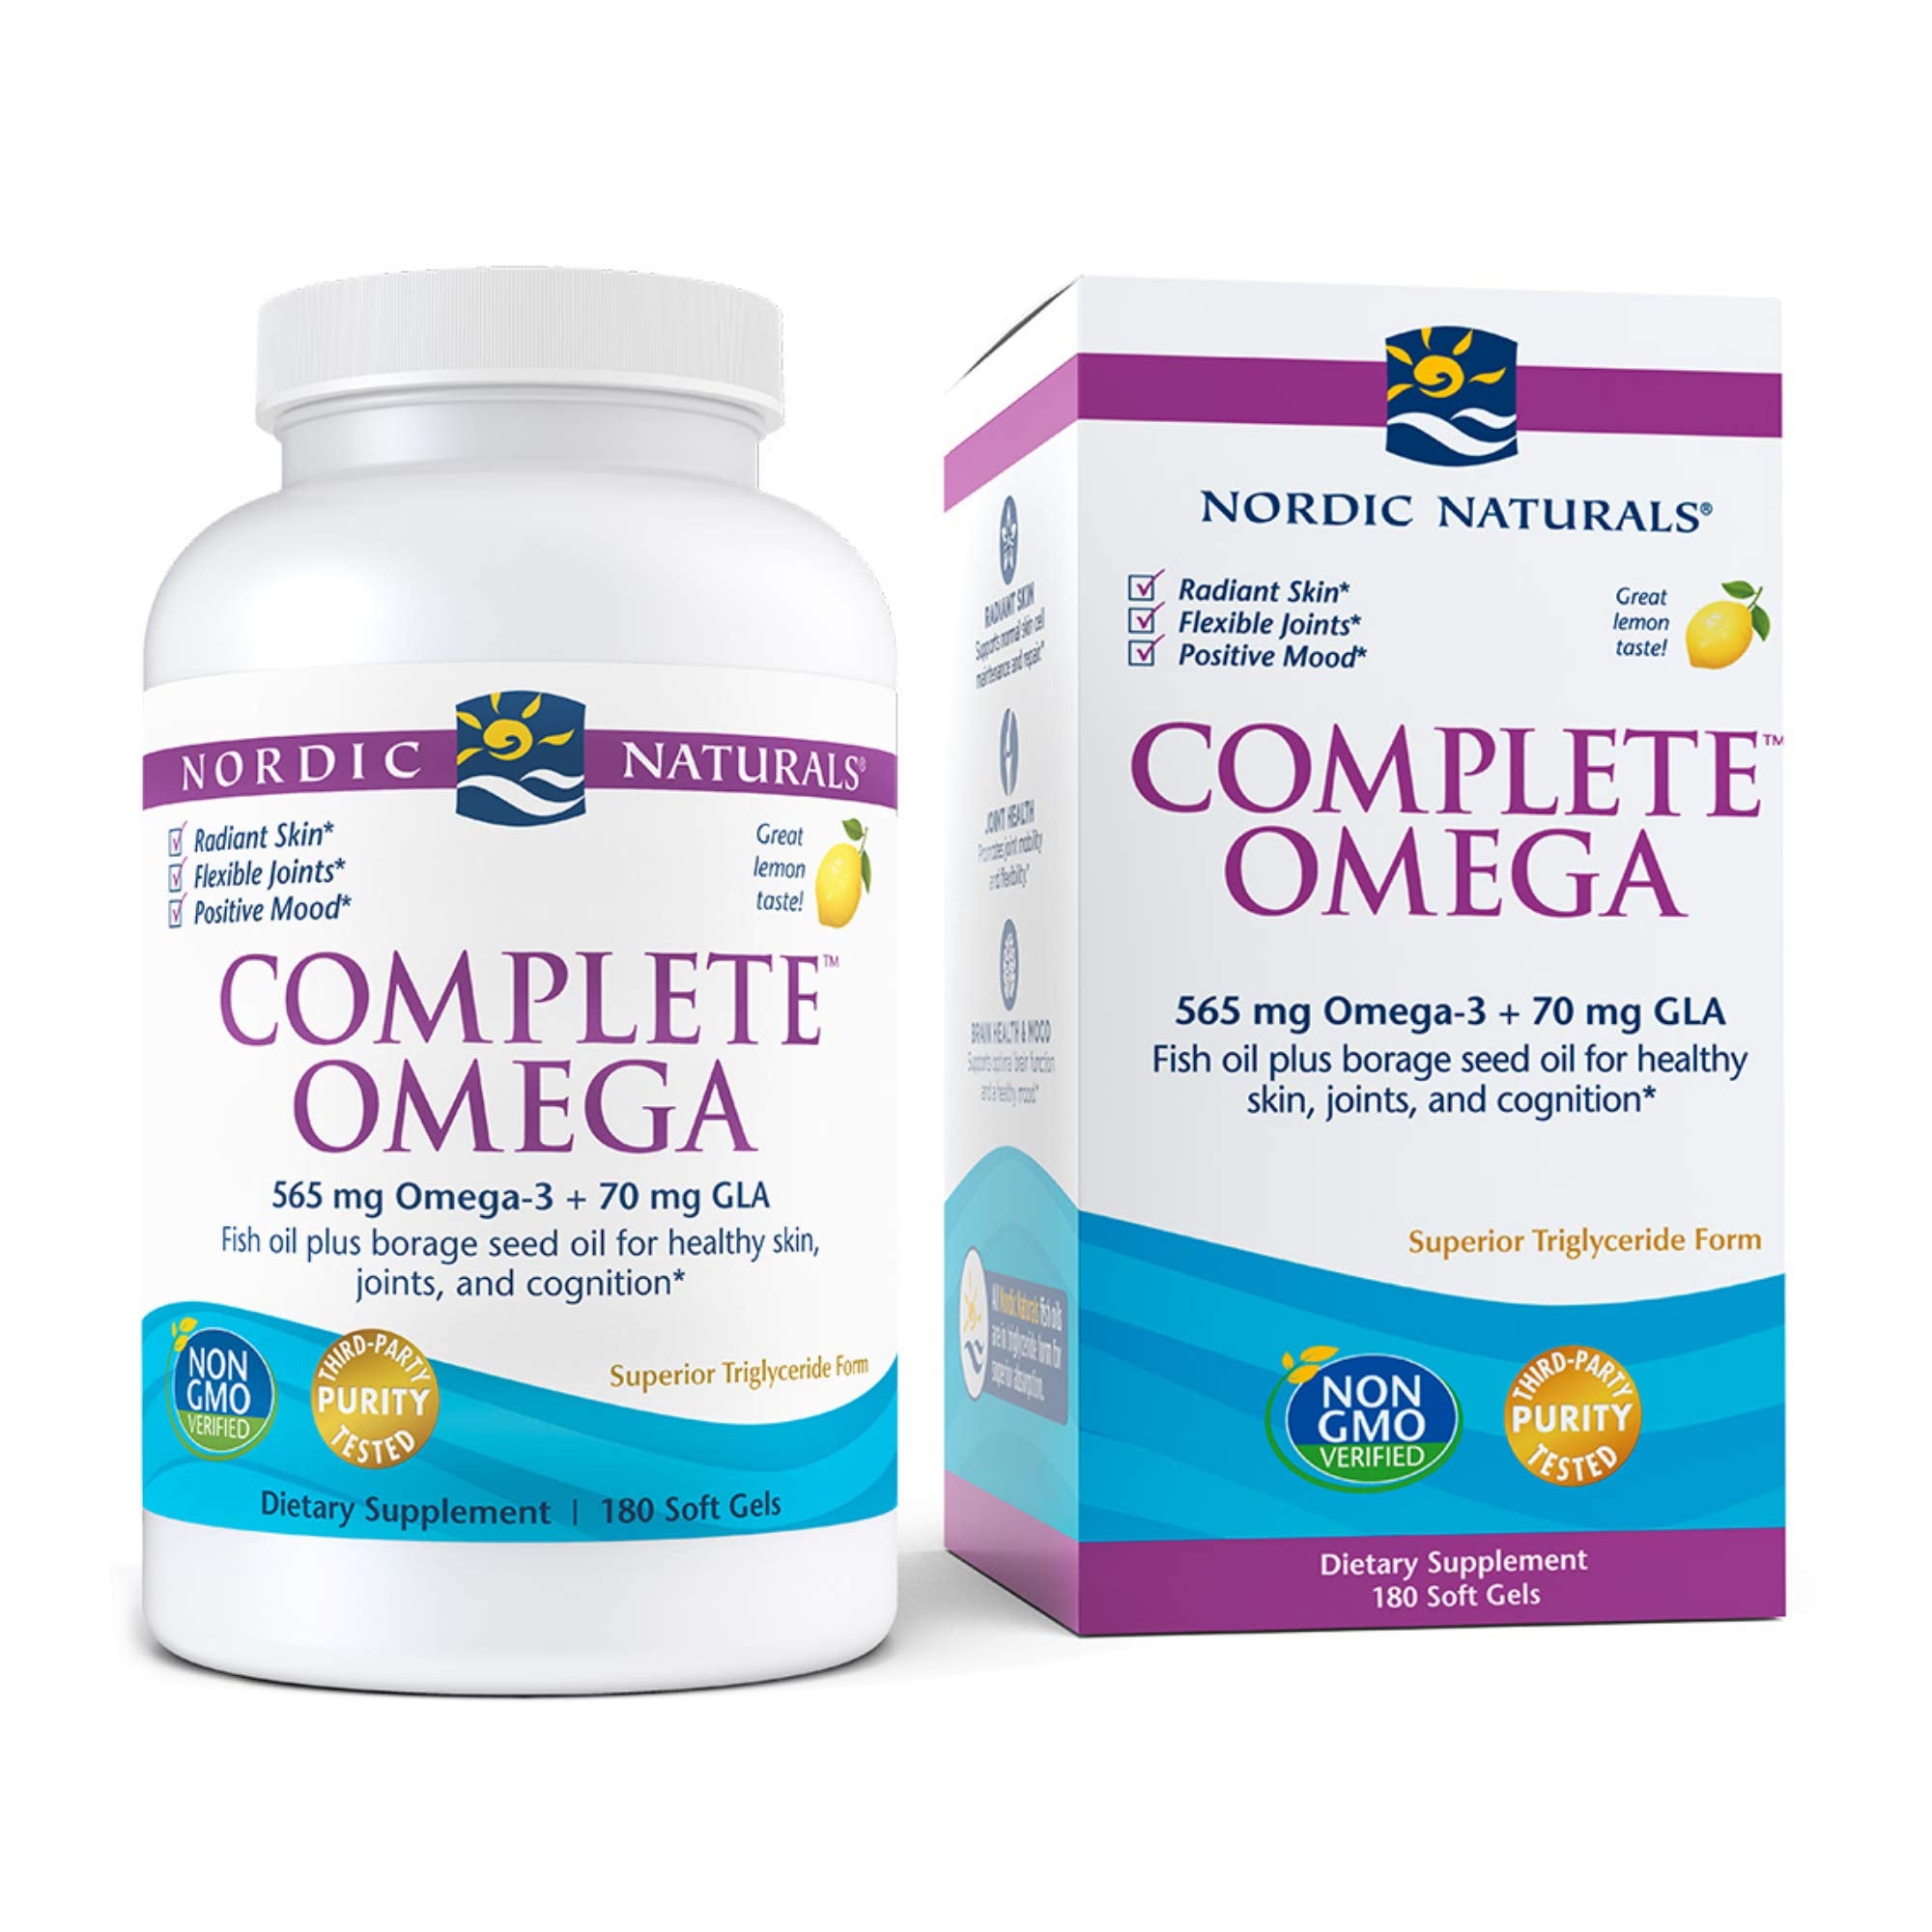 Nordic Naturals Complete Omega - Omegas 3-6-9 From Fish Oil and Borage Oil, Supports Heart, Brain, Joint, and Skin Health*, Burpless, Lemon Flavor, 180 Count